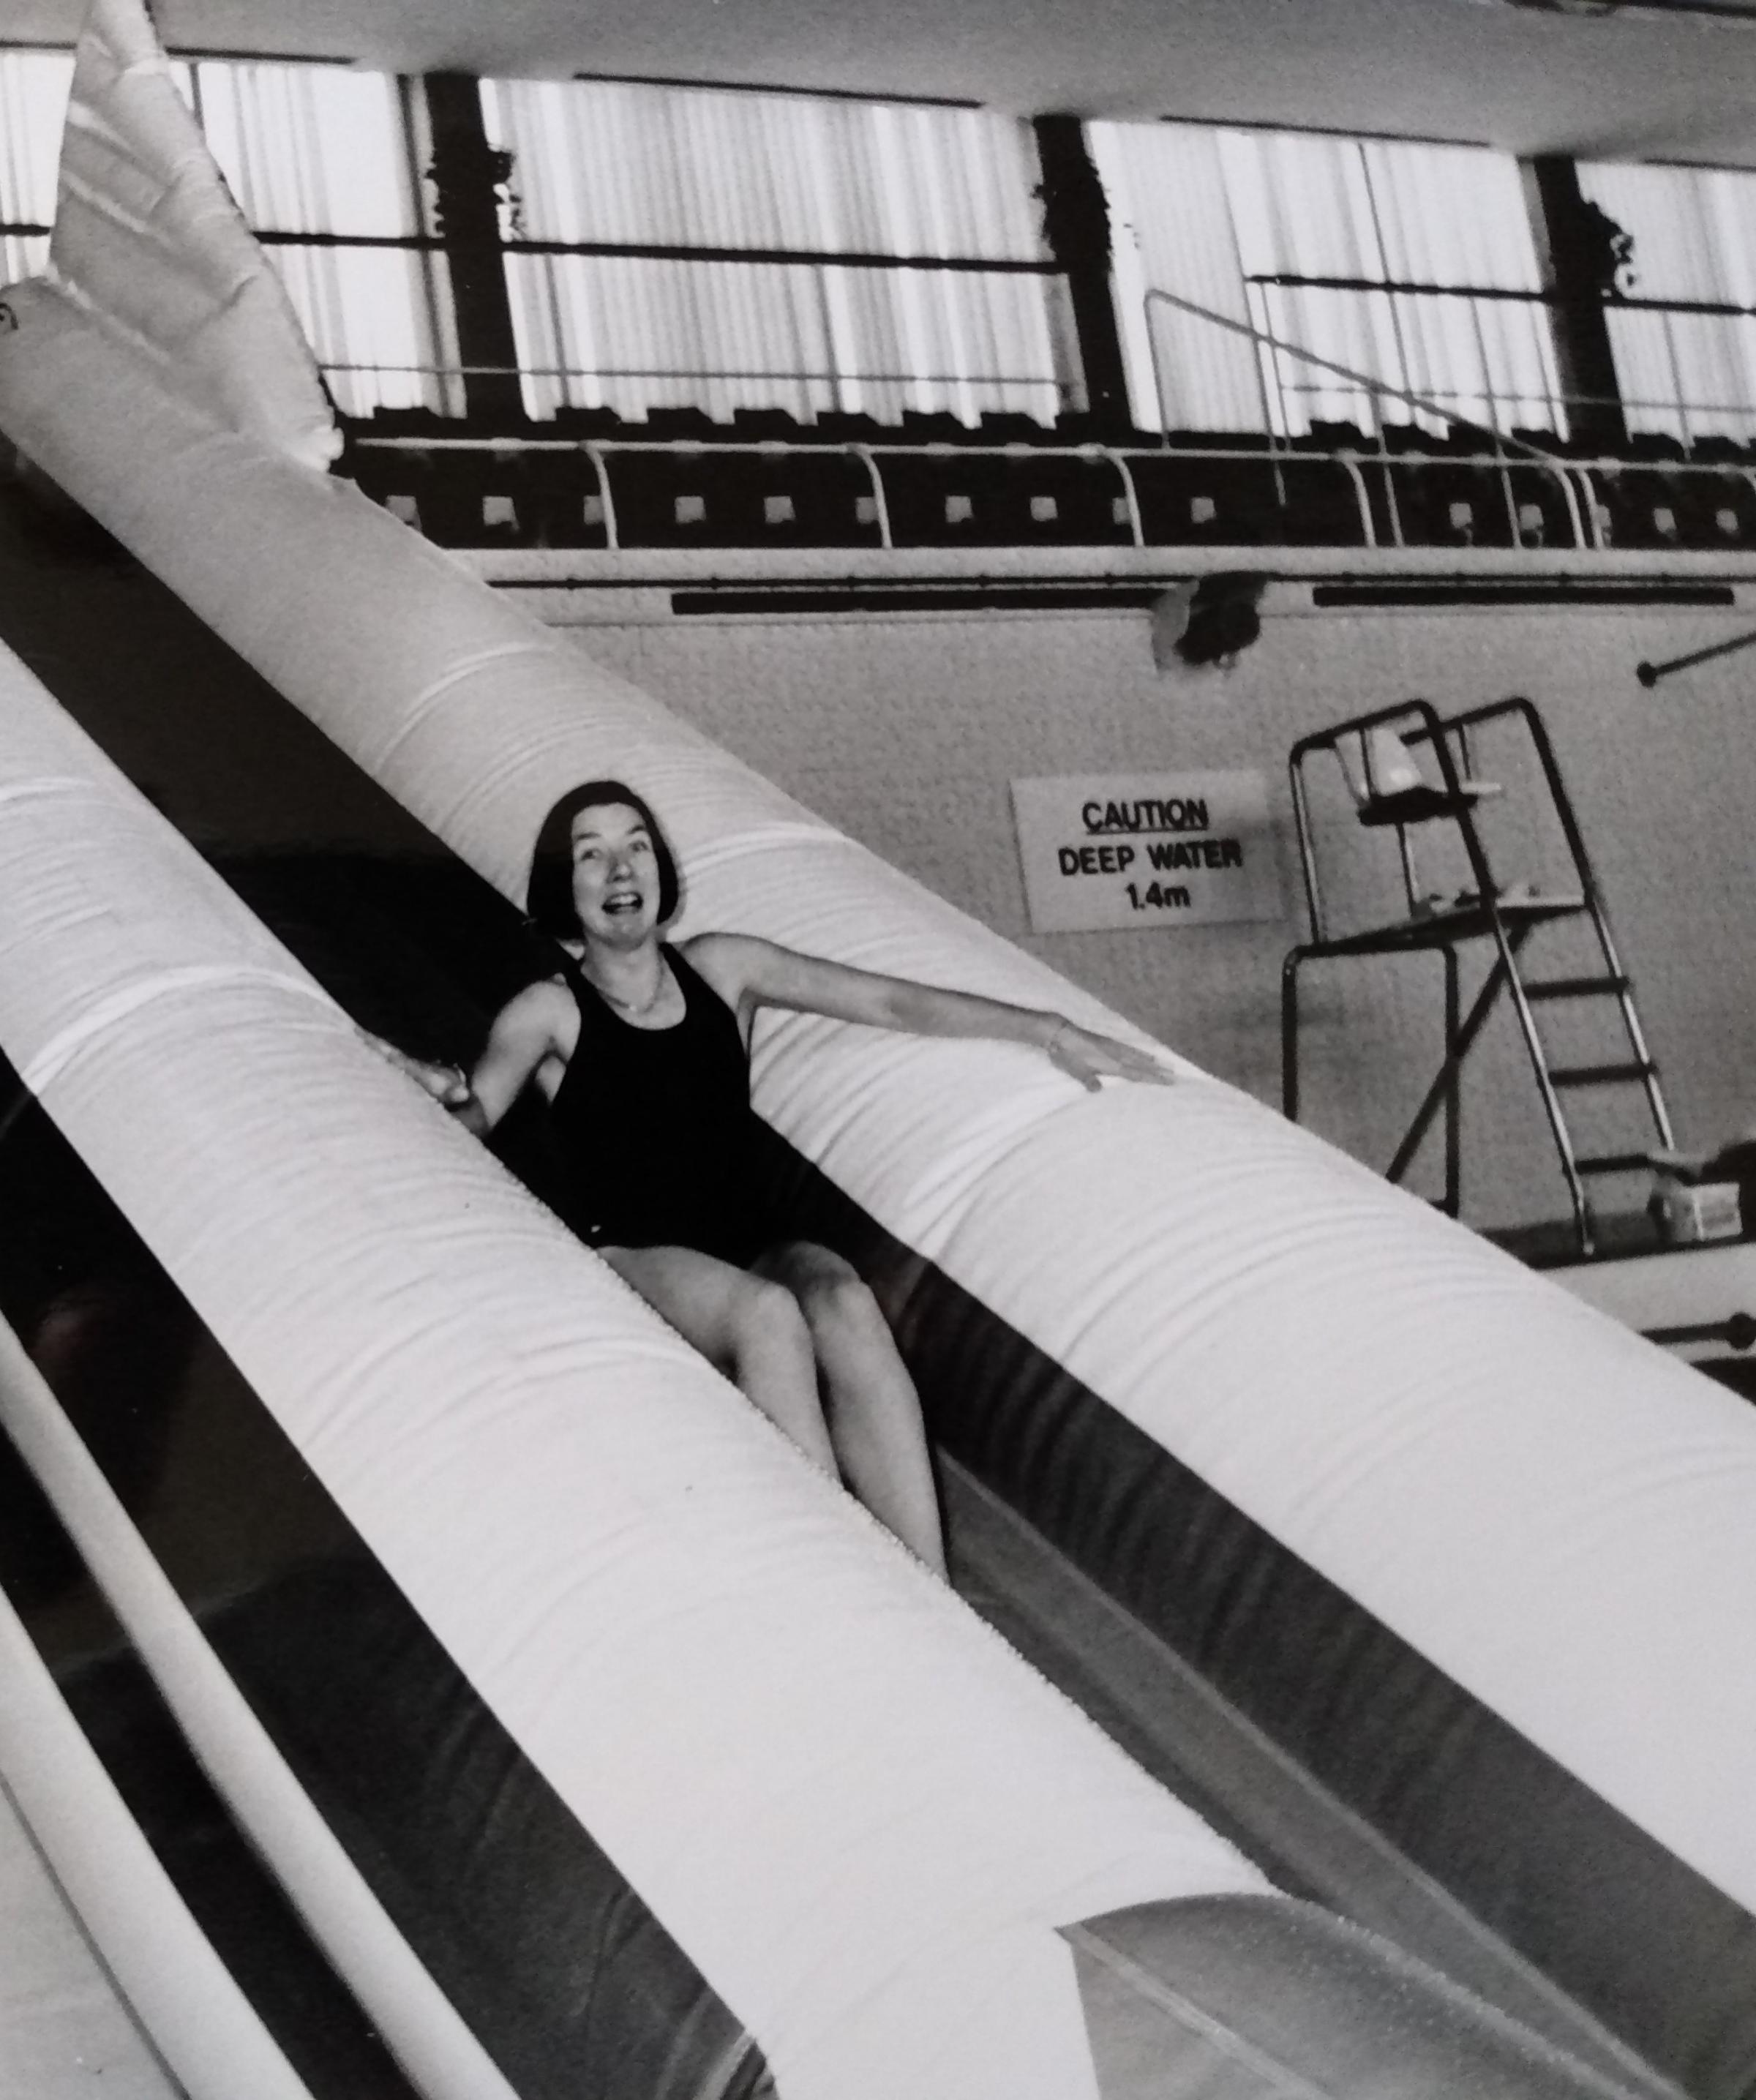 A promotional shot for the launch of the new slide in the pool. The picture was taken on Christmas Eve 1991